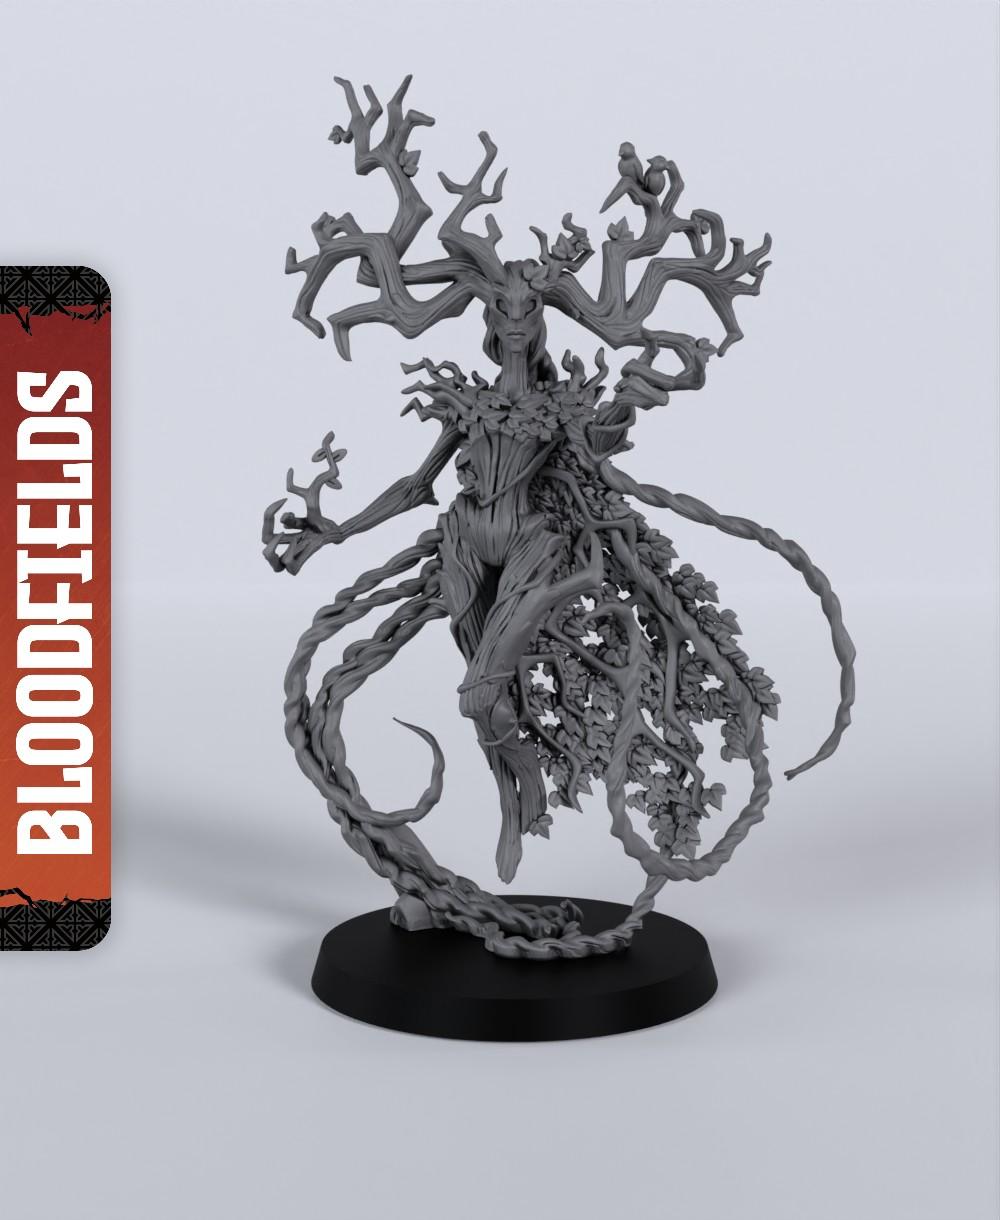 Shadowroot - With Free Dragon Warhammer - 5e DnD Inspired for RPG and Wargamers 3d model